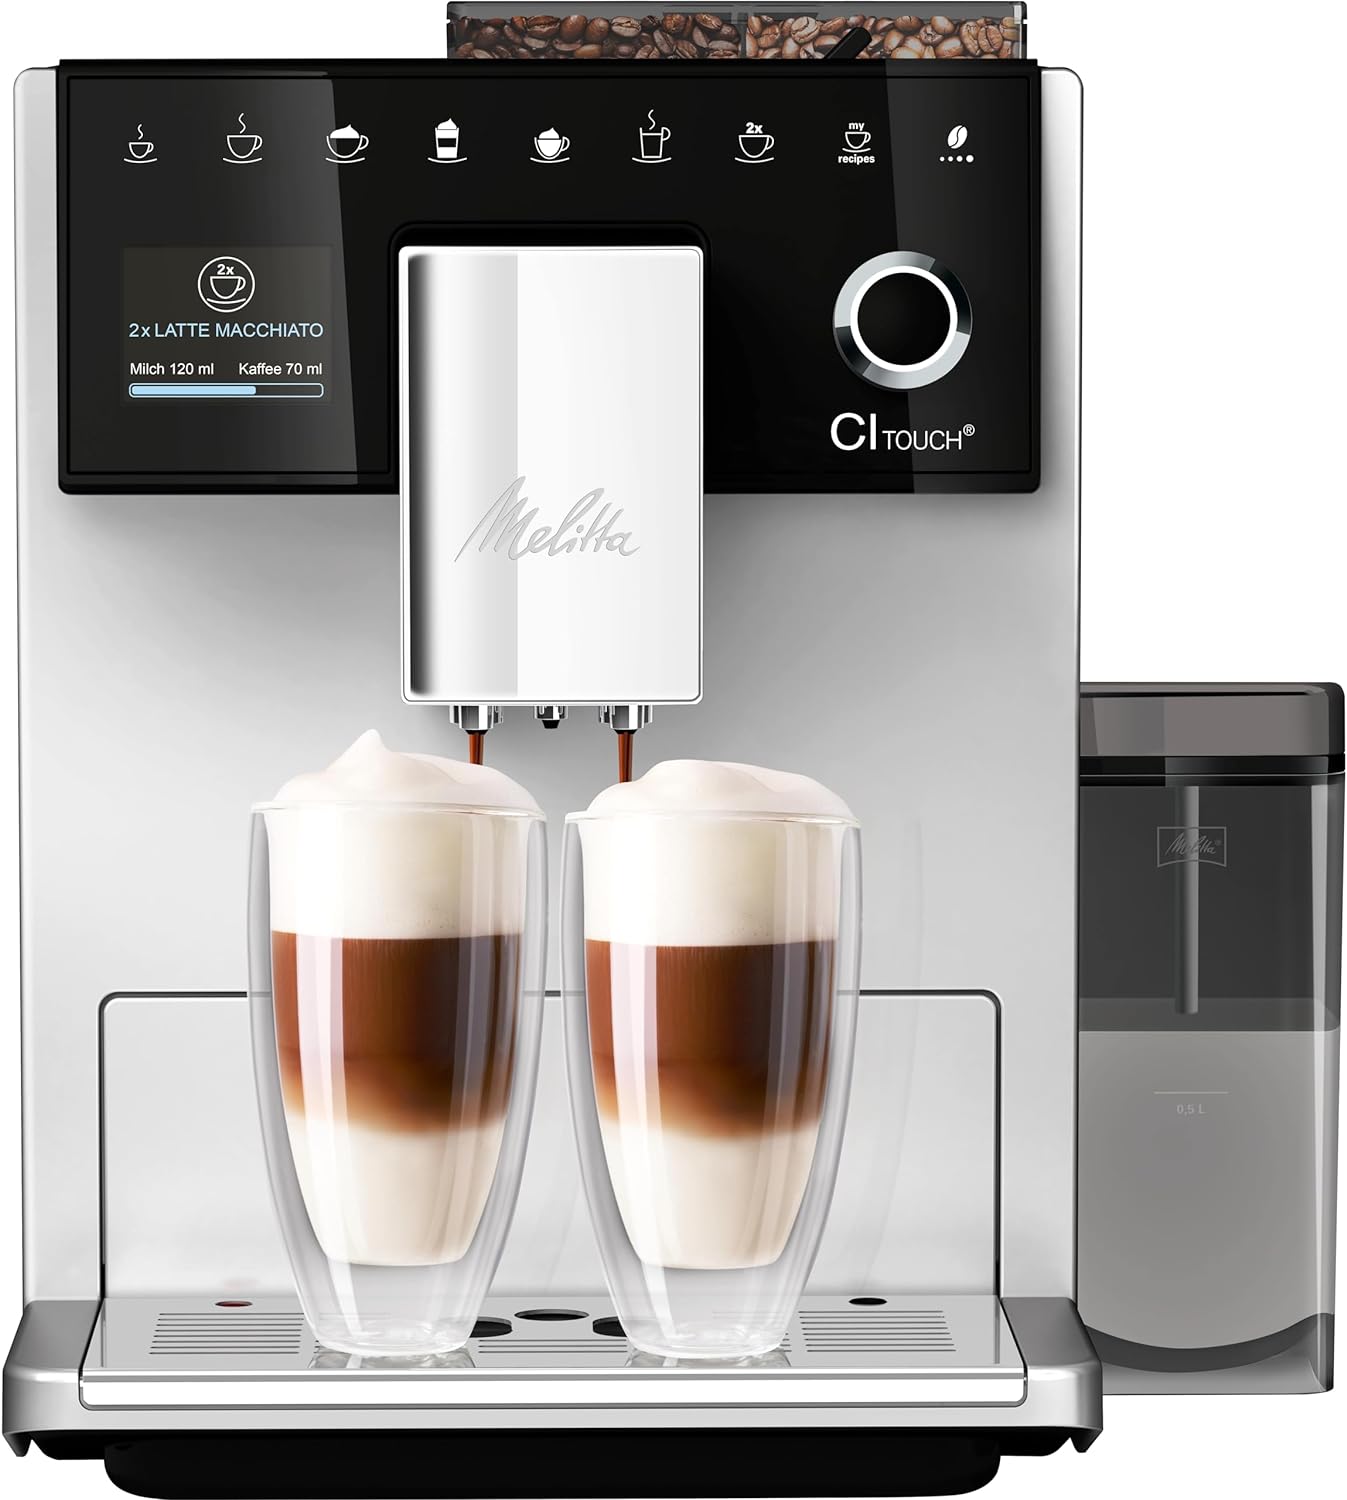 Melitta CI Touch - Fully Automatic Coffee Machine - with Milk System - Two-Chamber Bean Container - One Touch Display - 4-Level Adjustable Coffee Strength - Silver (F630-111)